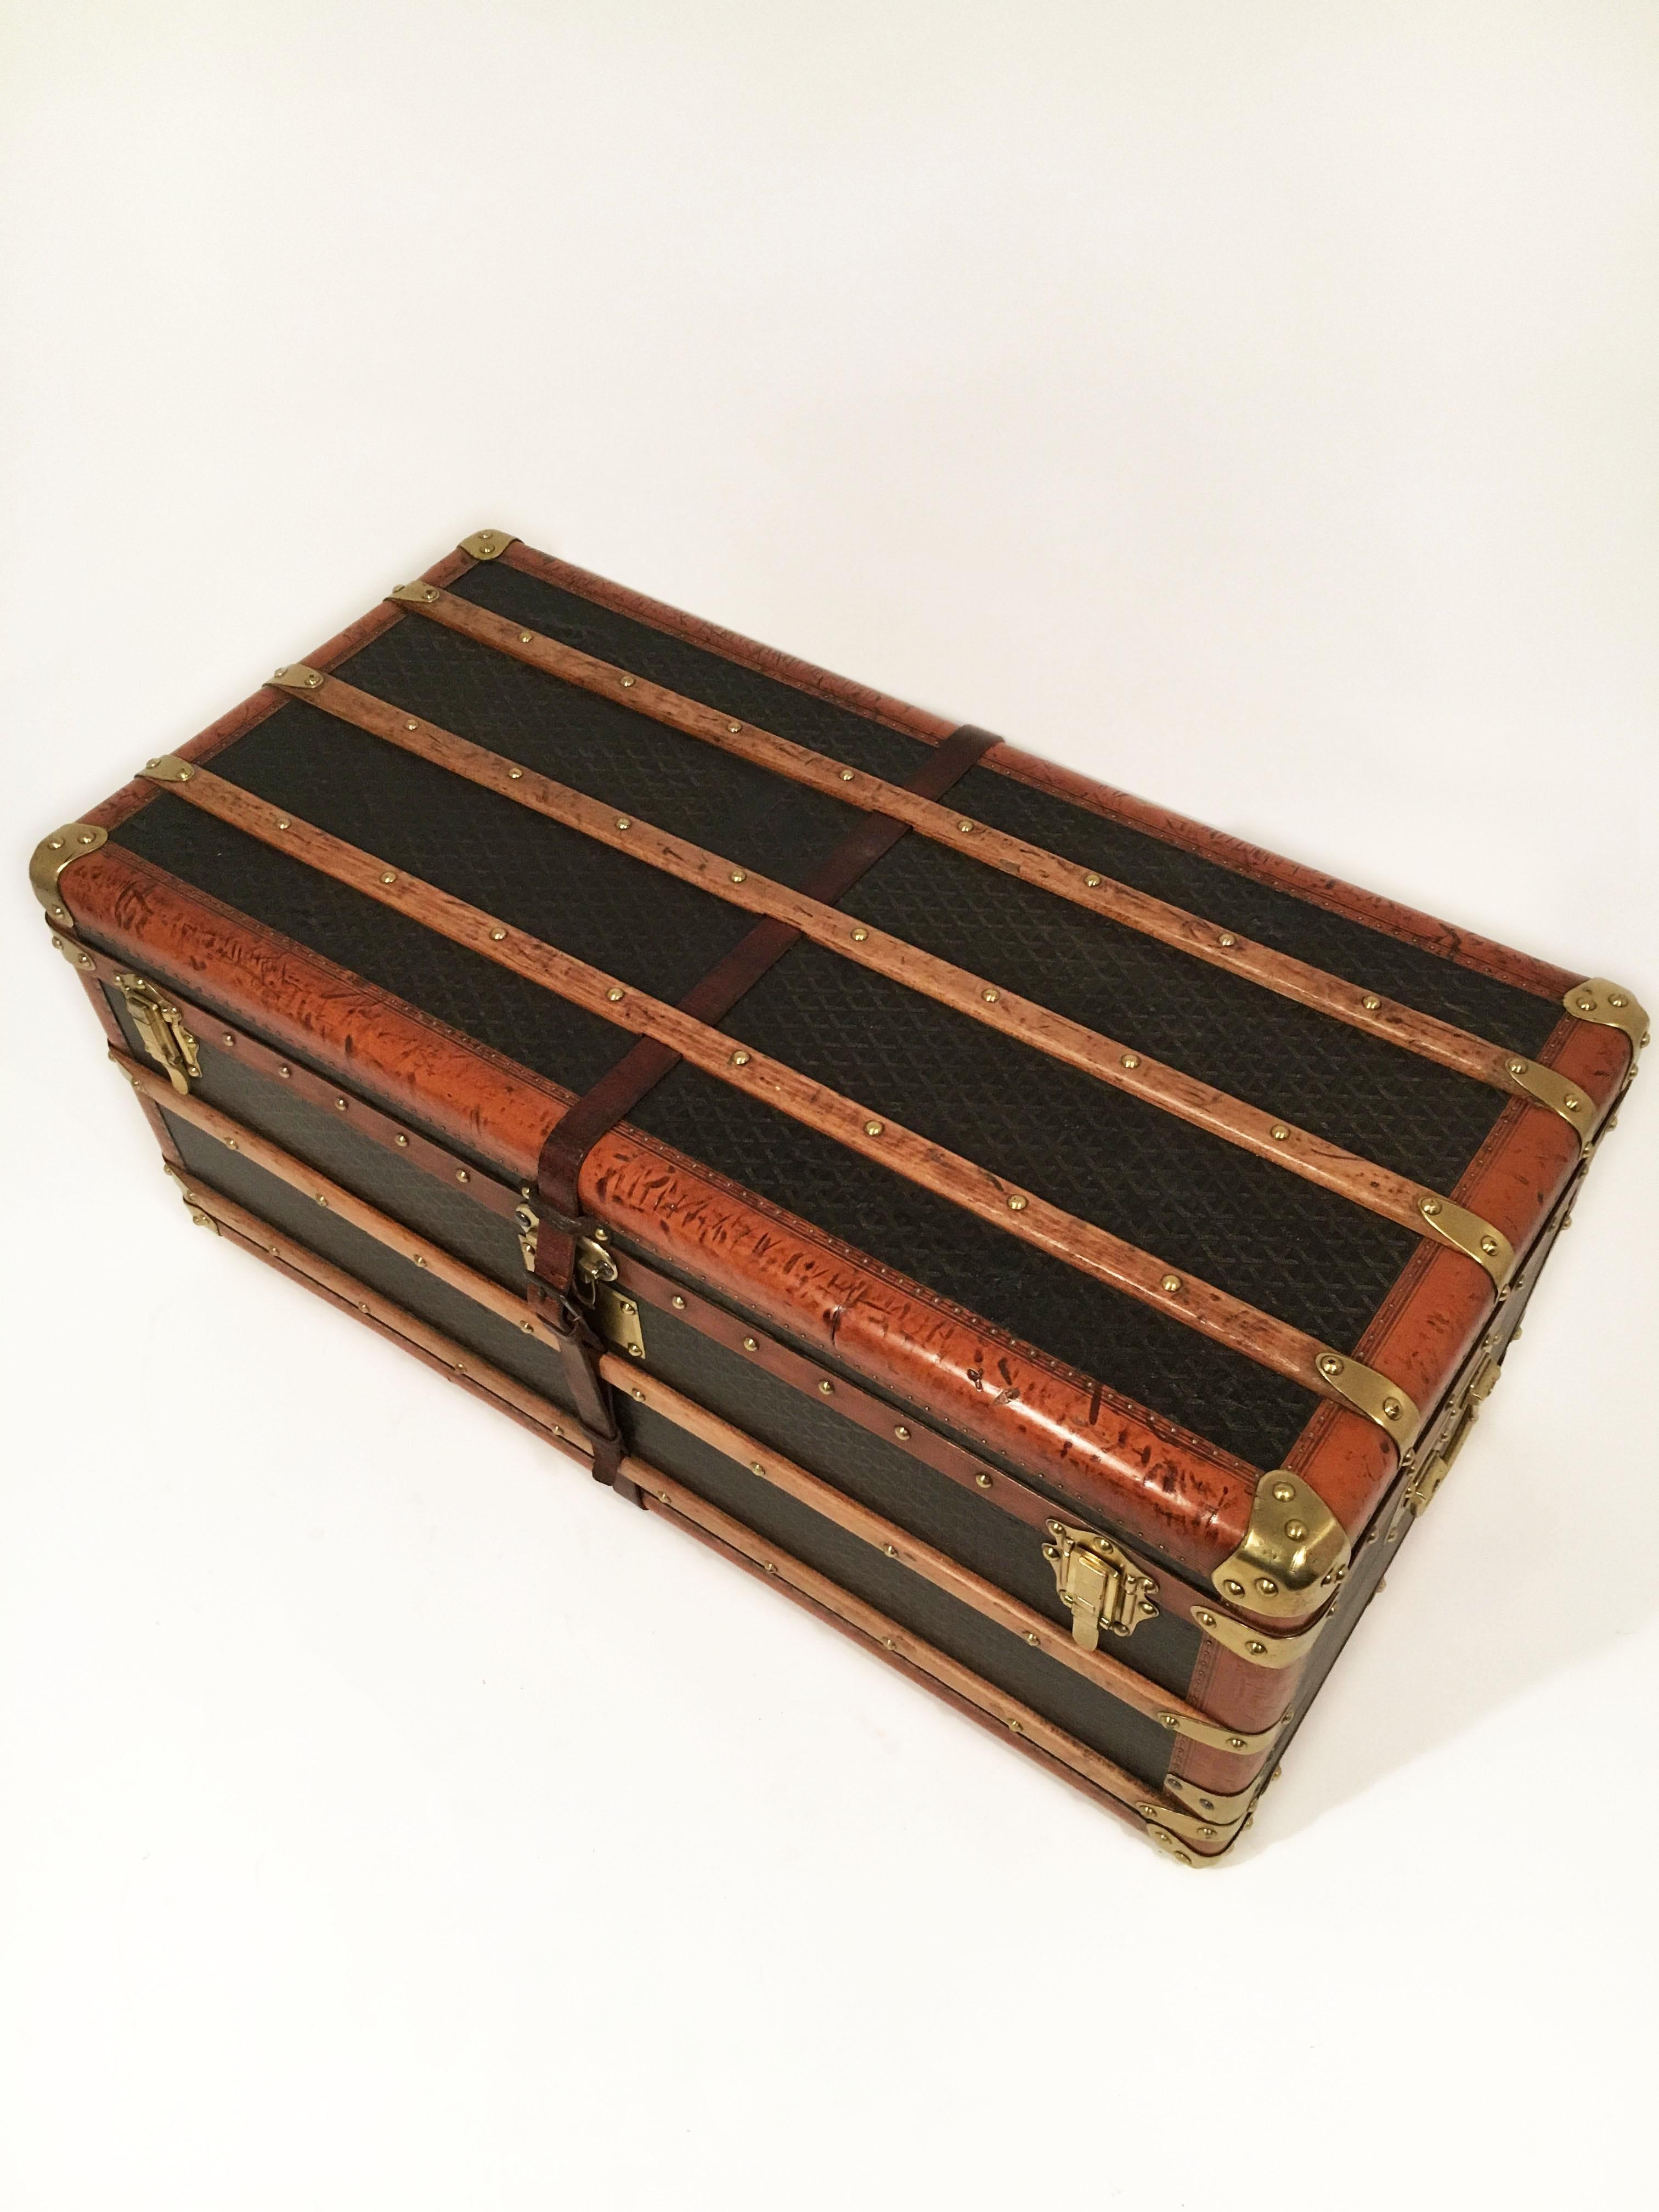 French Goyard Steamer Trunk from the Princely House of Thurn and Taxis For Sale